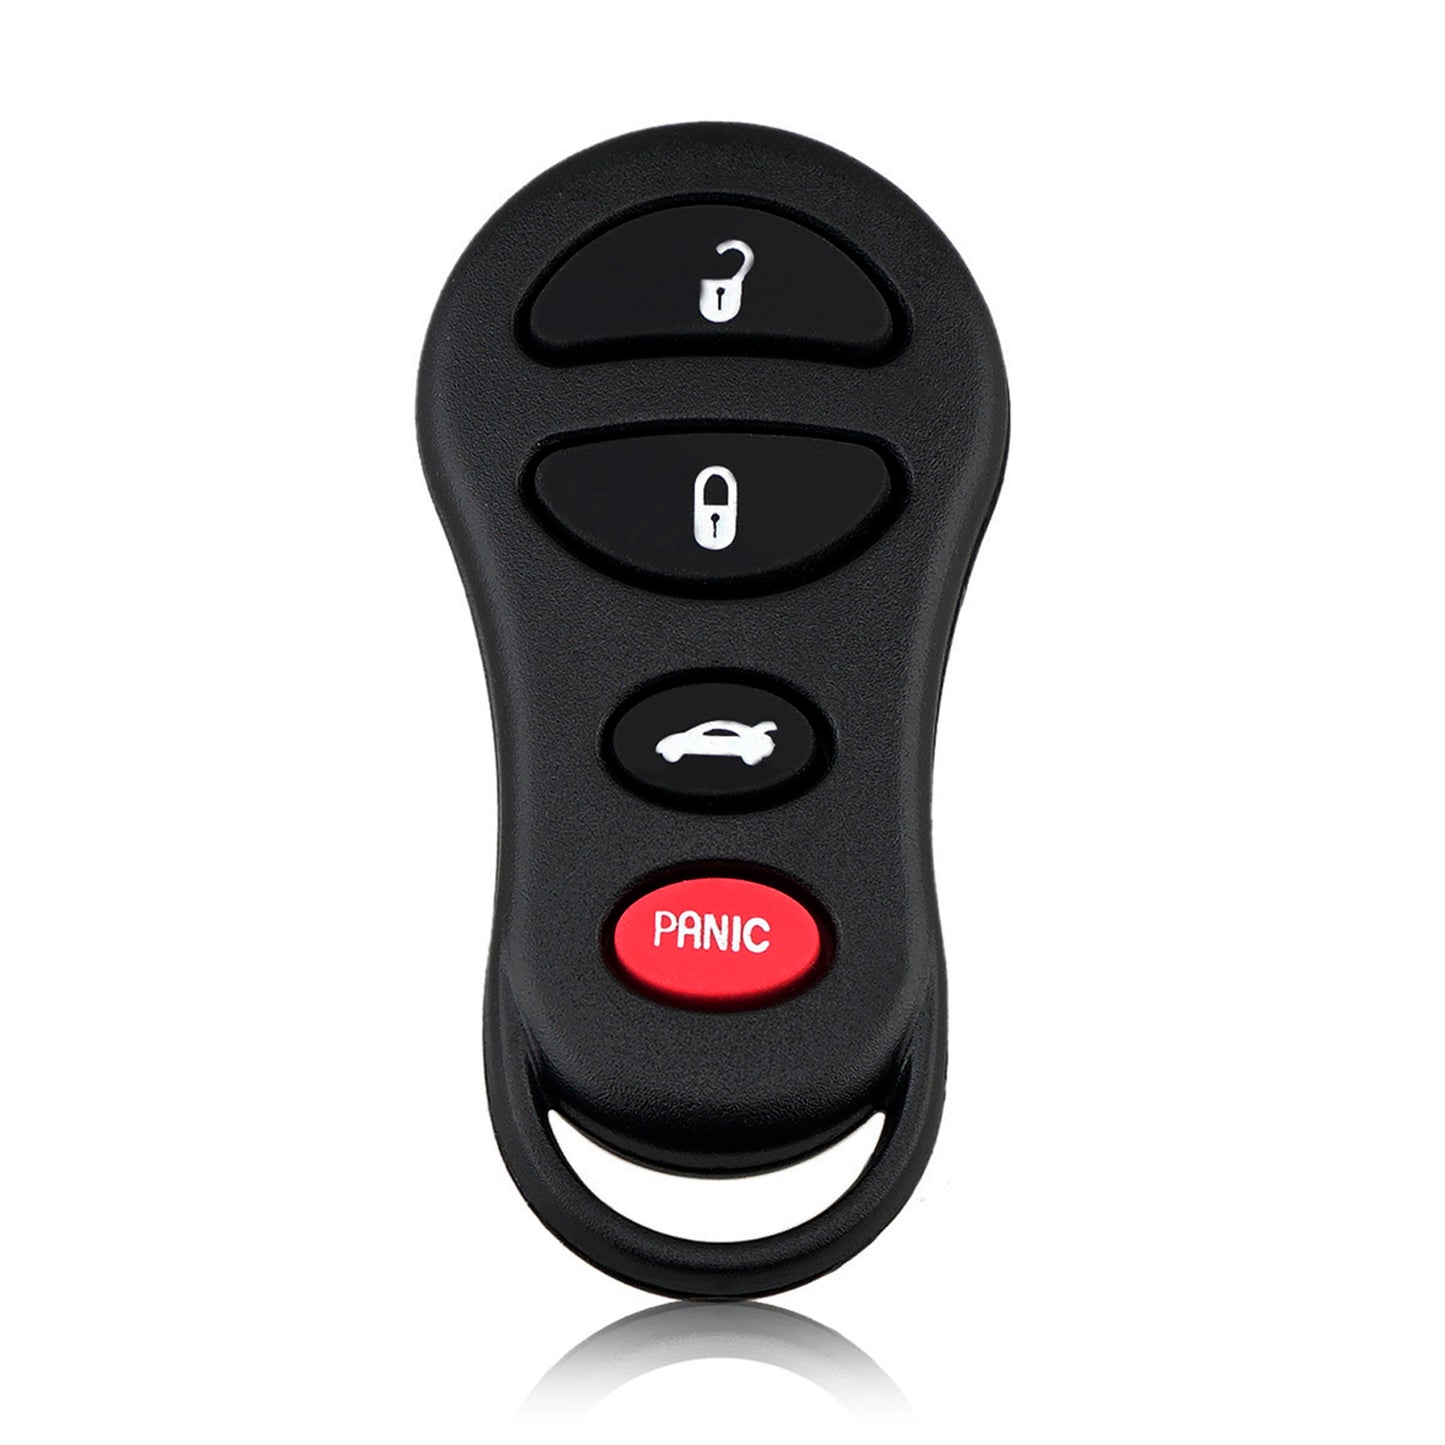 4 Buttons 315MHz Keyless Entry Fob Remote Car Key For 2001-2006 Chrysler 300  Concorde LHS  Sebring *** (Only 4 door and convertible - Will not work for the coupe)*** FCC ID: GQ43VT17T SKU : J376